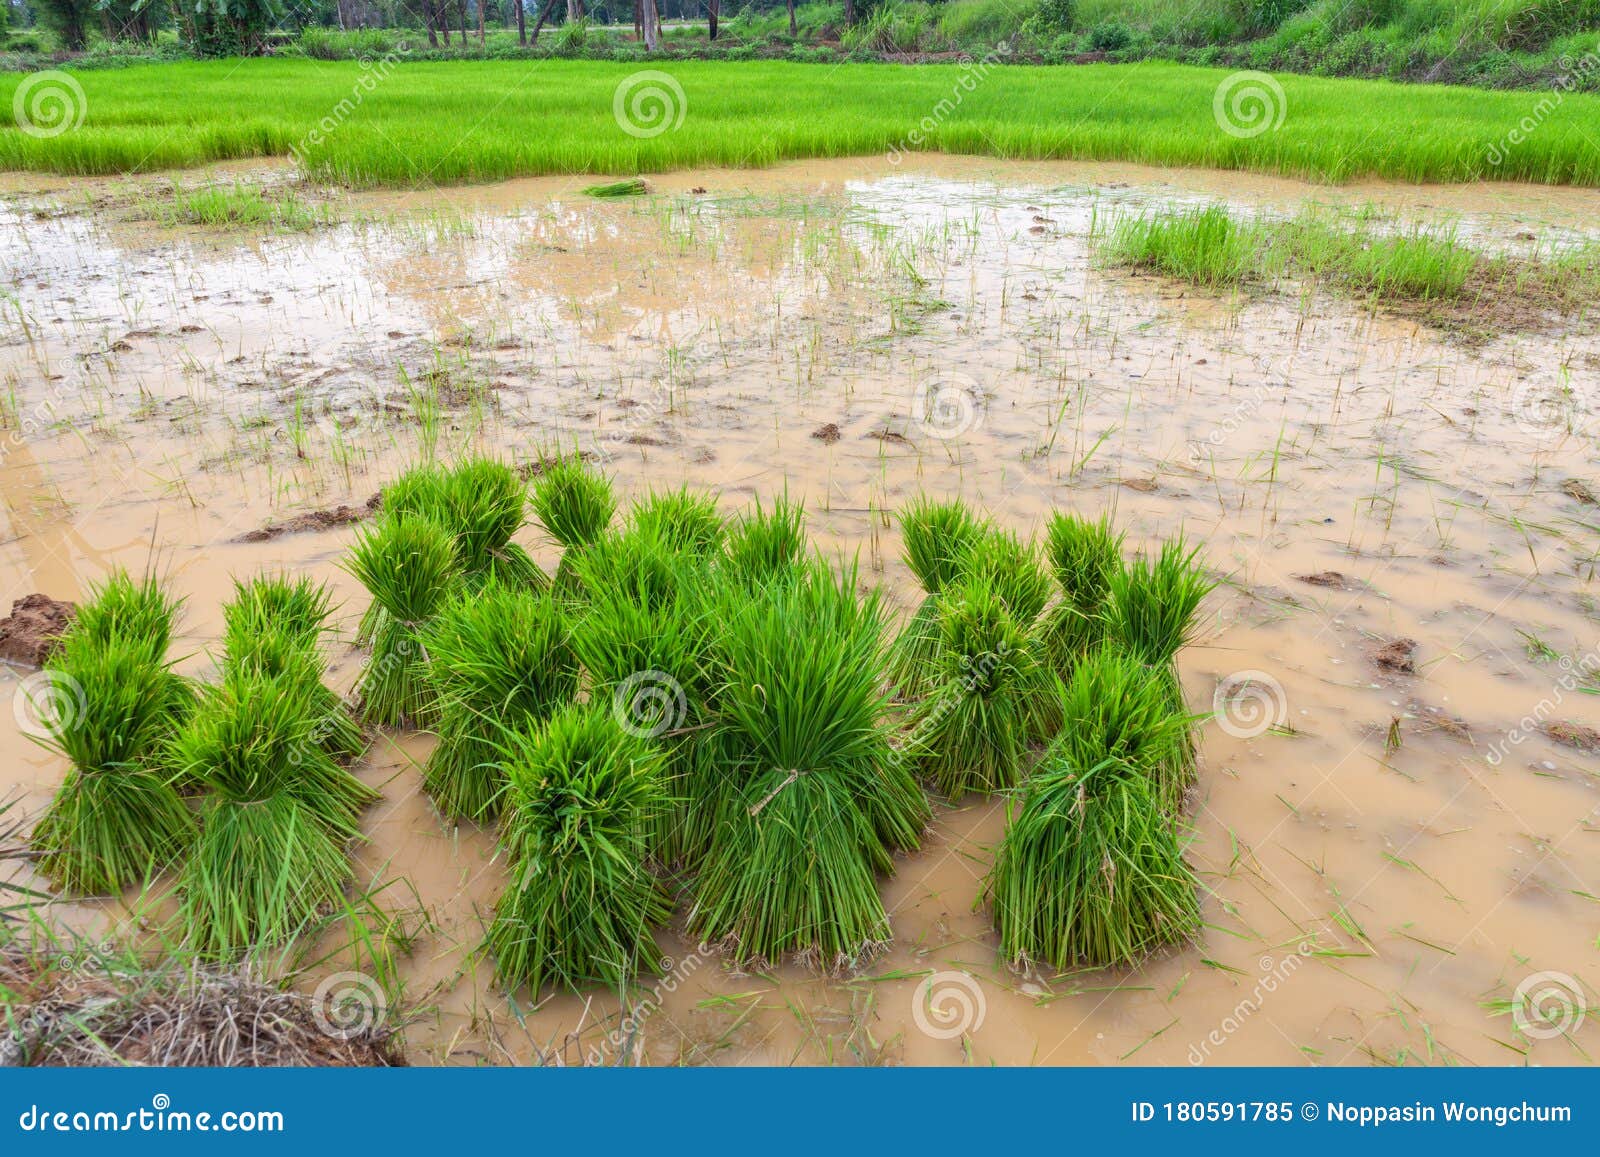 young rice sprout ready to planted in the rice field